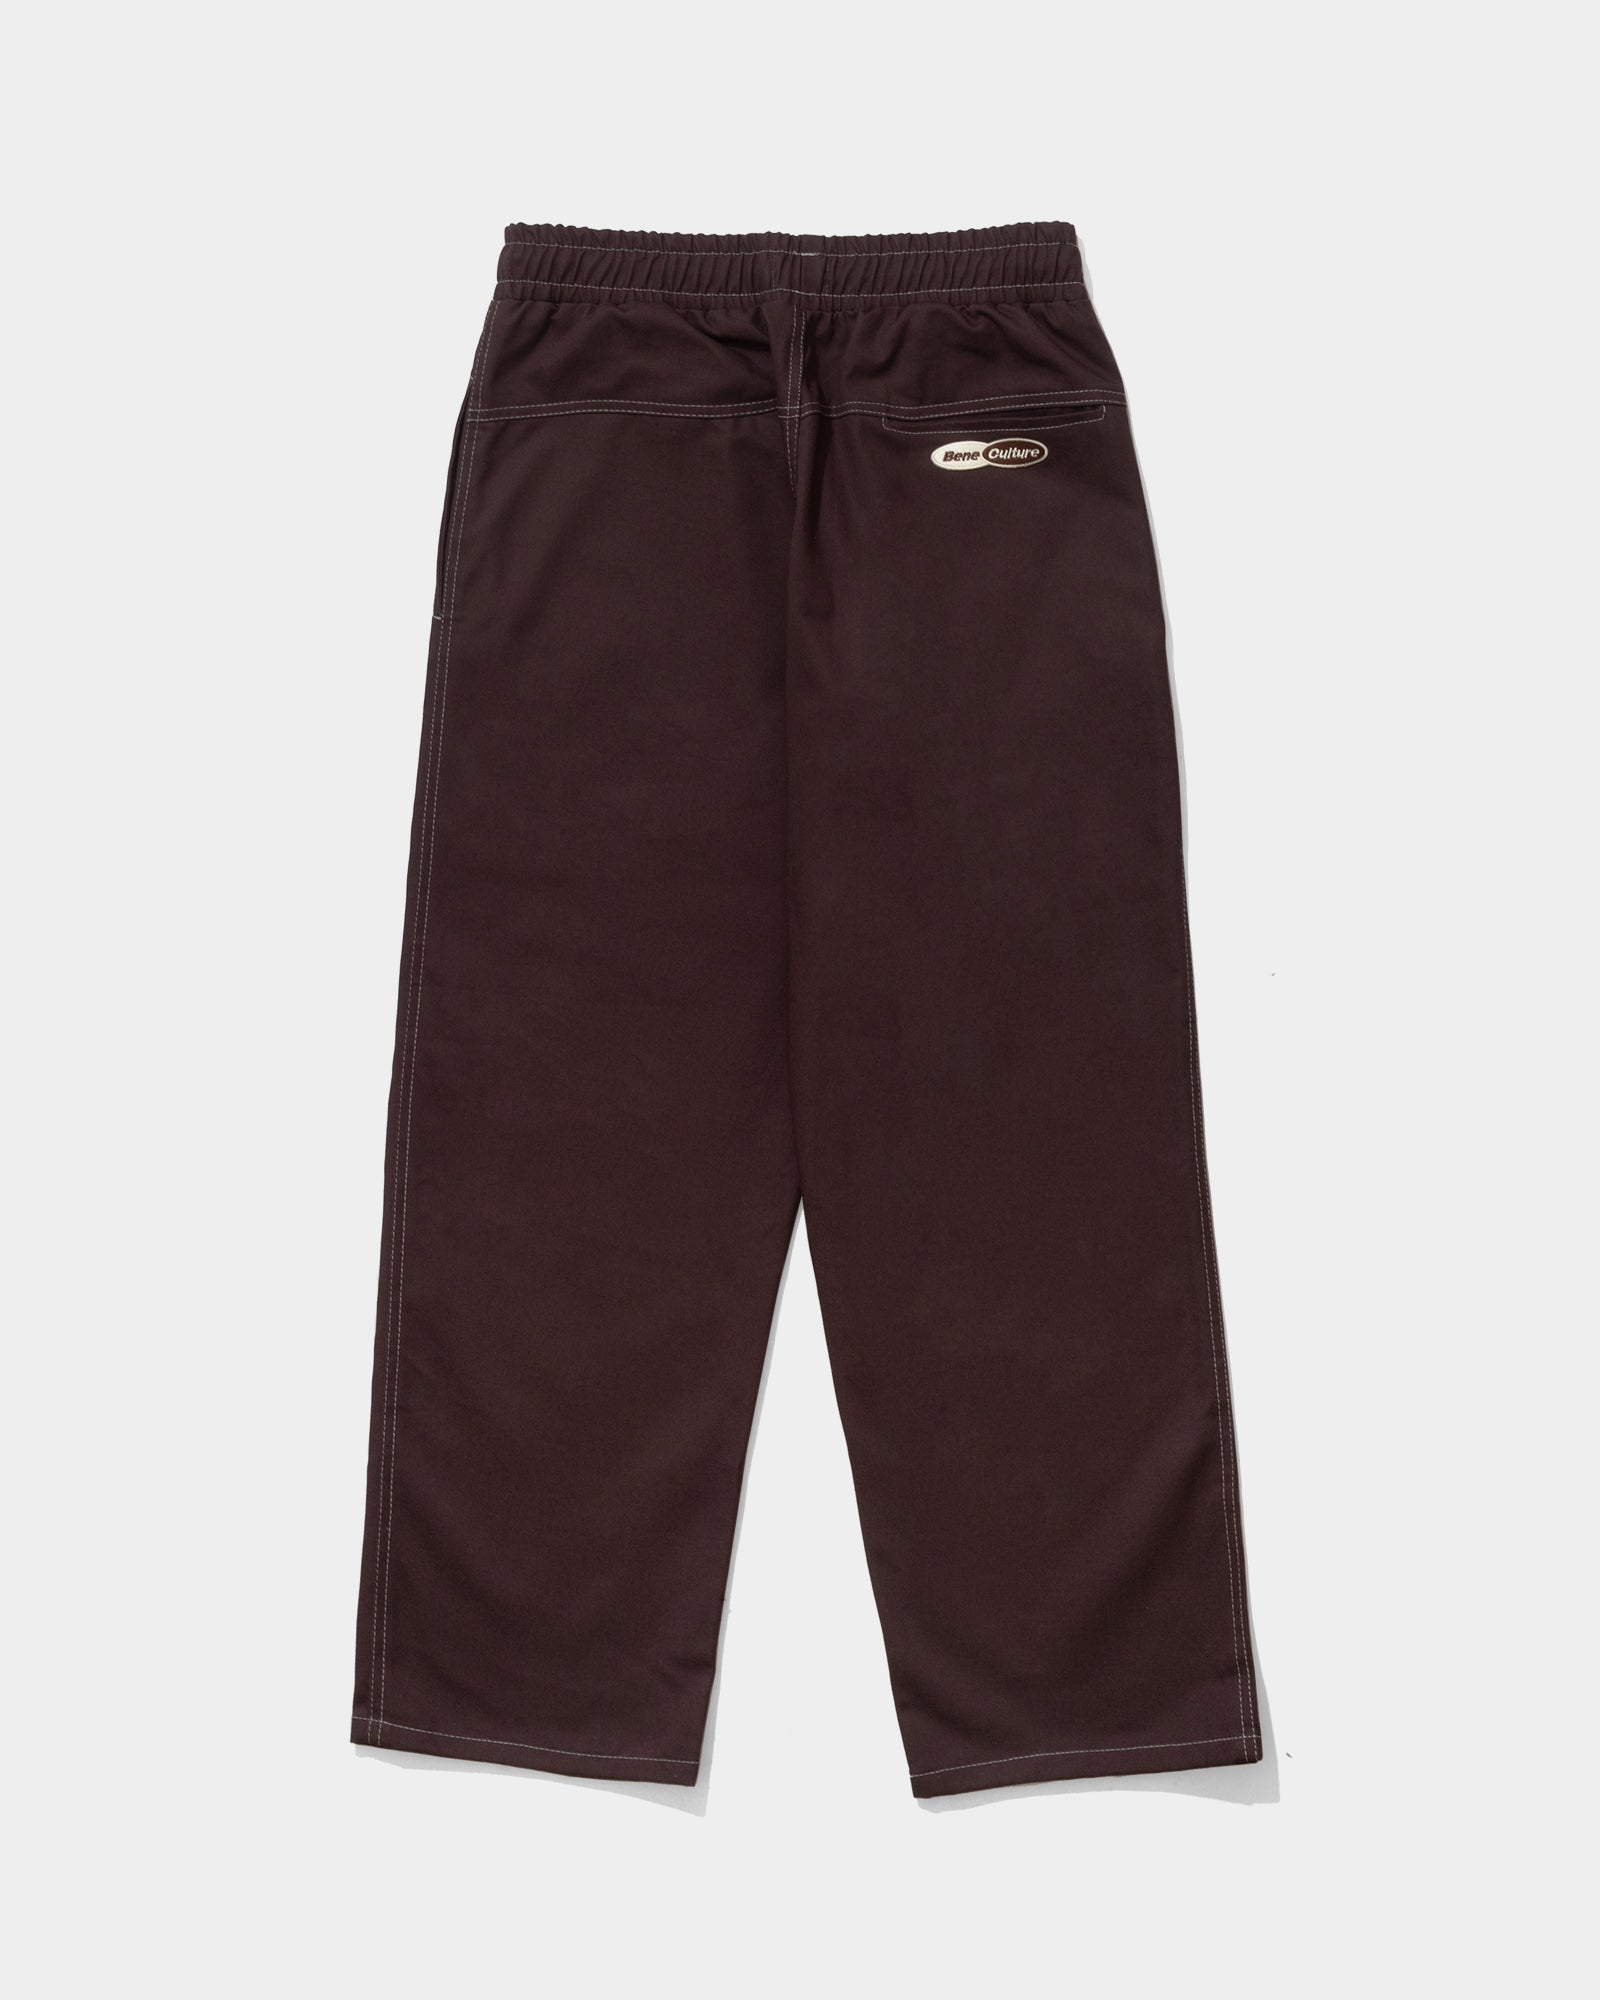 All-Rounder Pants (Brown)